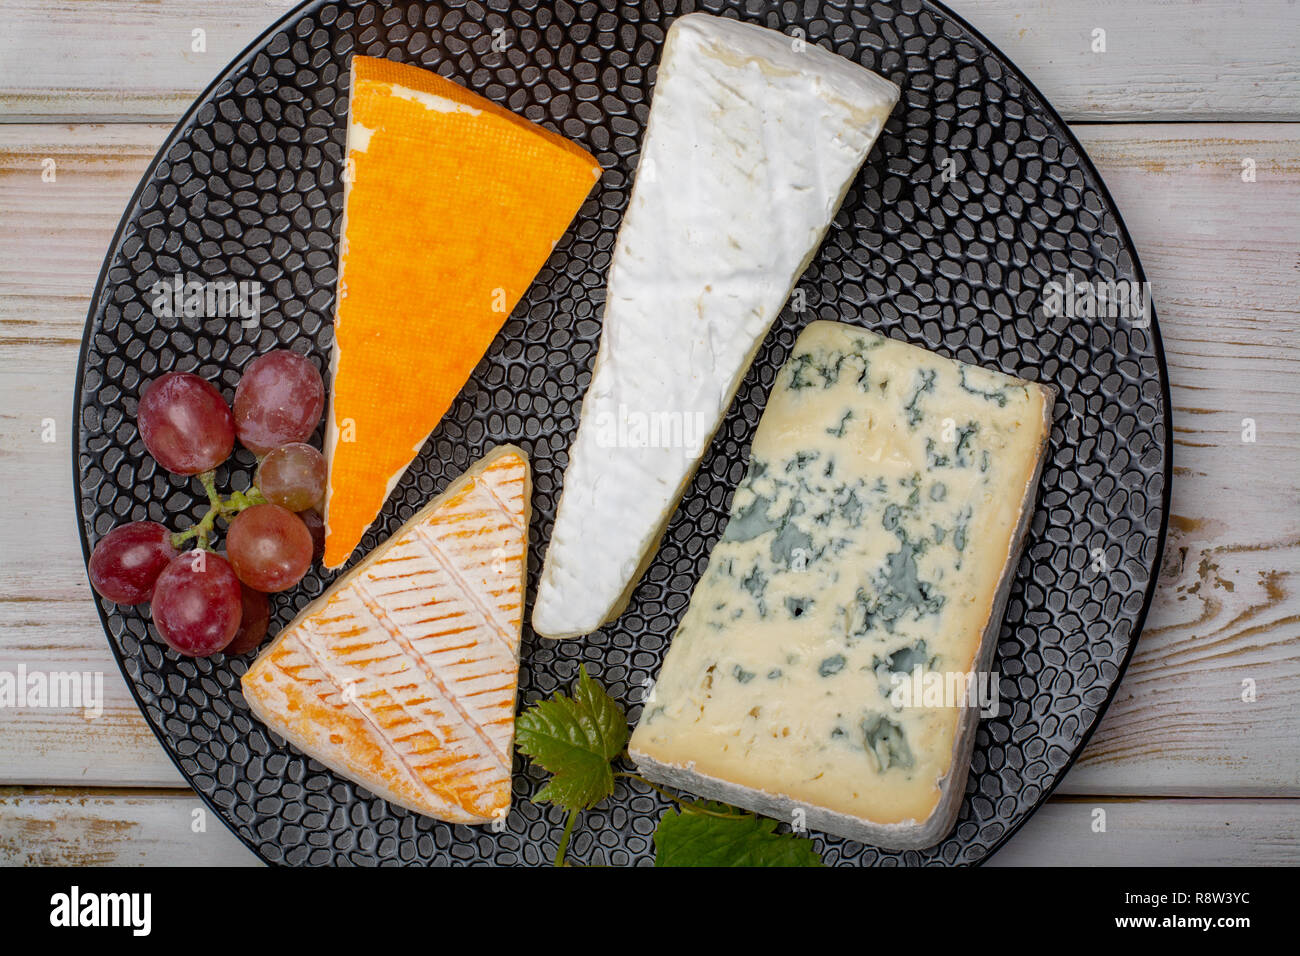 Tasting plate with four France cheeses, cream brie, marcaire, saint paulin and blue auvergne cheese, served with fresh ripe grapes close up Stock Photo